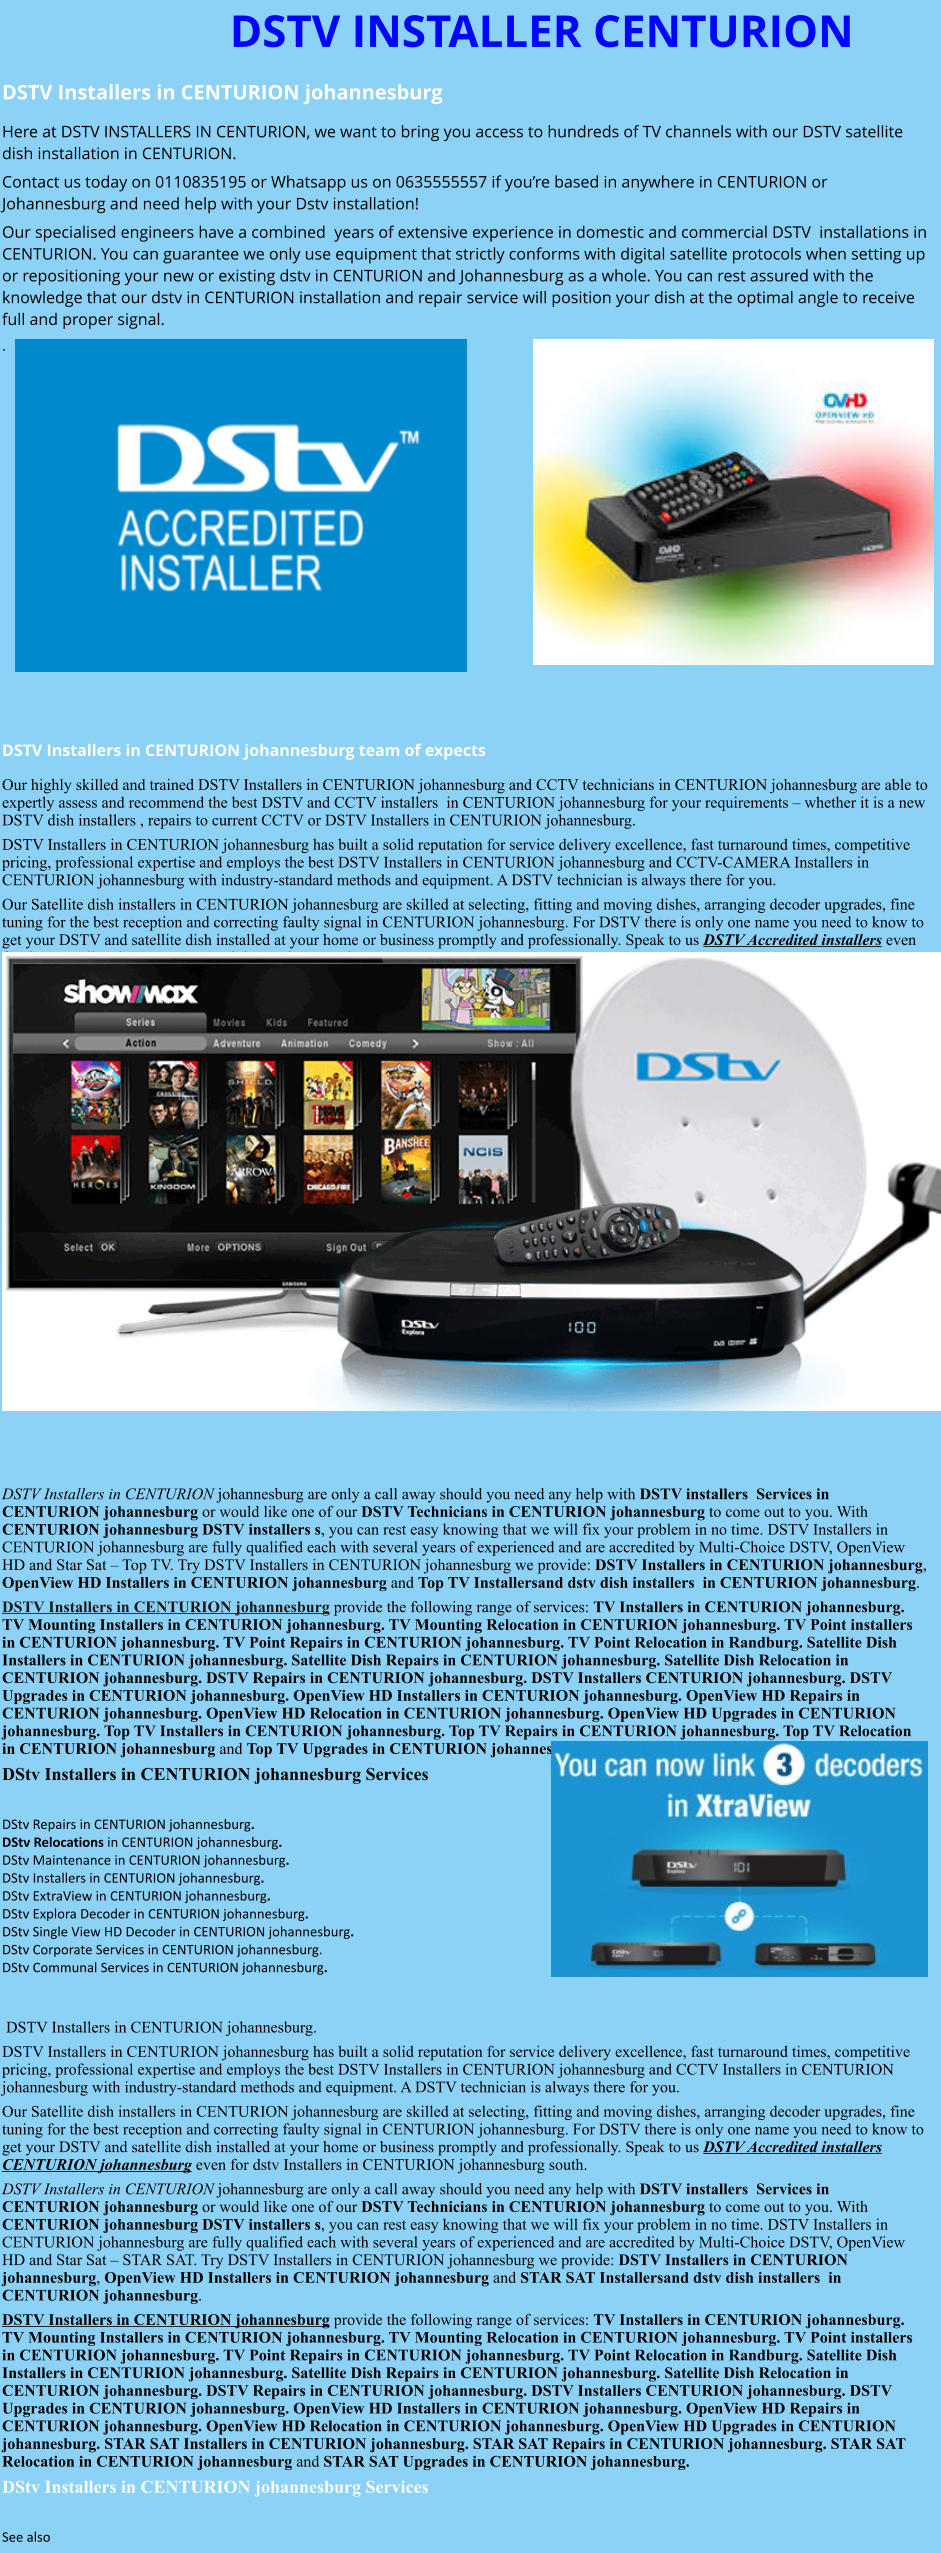 DSTV INSTALLER CENTURION DSTV Installers in CENTURION johannesburg  Here at DSTV INSTALLERS IN CENTURION, we want to bring you access to hundreds of TV channels with our DSTV satellite dish installation in CENTURION. Contact us today on 0110835195 or Whatsapp us on 0635555557 if you’re based in anywhere in CENTURION or Johannesburg and need help with your Dstv installation! Our specialised engineers have a combined  years of extensive experience in domestic and commercial DSTV  installations in CENTURION. You can guarantee we only use equipment that strictly conforms with digital satellite protocols when setting up or repositioning your new or existing dstv in CENTURION and Johannesburg as a whole. You can rest assured with the knowledge that our dstv in CENTURION installation and repair service will position your dish at the optimal angle to receive full and proper signal. .                DSTV Installers in CENTURION johannesburg team of expects Our highly skilled and trained DSTV Installers in CENTURION johannesburg and CCTV technicians in CENTURION johannesburg are able to expertly assess and recommend the best DSTV and CCTV installers  in CENTURION johannesburg for your requirements – whether it is a new DSTV dish installers , repairs to current CCTV or DSTV Installers in CENTURION johannesburg. DSTV Installers in CENTURION johannesburg has built a solid reputation for service delivery excellence, fast turnaround times, competitive pricing, professional expertise and employs the best DSTV Installers in CENTURION johannesburg and CCTV-CAMERA Installers in CENTURION johannesburg with industry-standard methods and equipment. A DSTV technician is always there for you. Our Satellite dish installers in CENTURION johannesburg are skilled at selecting, fitting and moving dishes, arranging decoder upgrades, fine tuning for the best reception and correcting faulty signal in CENTURION johannesburg. For DSTV there is only one name you need to know to get your DSTV and satellite dish installed at your home or business promptly and professionally. Speak to us DSTV Accredited installers even for dstv Installers in CENTURION johannesburg south.                      DSTV Installers in CENTURION johannesburg are only a call away should you need any help with DSTV installers  Services in CENTURION johannesburg or would like one of our DSTV Technicians in CENTURION johannesburg to come out to you. With CENTURION johannesburg DSTV installers s, you can rest easy knowing that we will fix your problem in no time. DSTV Installers in CENTURION johannesburg are fully qualified each with several years of experienced and are accredited by Multi-Choice DSTV, OpenView HD and Star Sat – Top TV. Try DSTV Installers in CENTURION johannesburg we provide: DSTV Installers in CENTURION johannesburg, OpenView HD Installers in CENTURION johannesburg and Top TV Installersand dstv dish installers  in CENTURION johannesburg. DSTV Installers in CENTURION johannesburg provide the following range of services: TV Installers in CENTURION johannesburg. TV Mounting Installers in CENTURION johannesburg. TV Mounting Relocation in CENTURION johannesburg. TV Point installers  in CENTURION johannesburg. TV Point Repairs in CENTURION johannesburg. TV Point Relocation in Randburg. Satellite Dish Installers in CENTURION johannesburg. Satellite Dish Repairs in CENTURION johannesburg. Satellite Dish Relocation in CENTURION johannesburg. DSTV Repairs in CENTURION johannesburg. DSTV Installers CENTURION johannesburg. DSTV Upgrades in CENTURION johannesburg. OpenView HD Installers in CENTURION johannesburg. OpenView HD Repairs in CENTURION johannesburg. OpenView HD Relocation in CENTURION johannesburg. OpenView HD Upgrades in CENTURION johannesburg. Top TV Installers in CENTURION johannesburg. Top TV Repairs in CENTURION johannesburg. Top TV Relocation in CENTURION johannesburg and Top TV Upgrades in CENTURION johannesburg. DStv Installers in CENTURION johannesburg Services  DStv Repairs in CENTURION johannesburg.  DStv Relocations in CENTURION johannesburg.  DStv Maintenance in CENTURION johannesburg. DStv Installers in CENTURION johannesburg. DStv ExtraView in CENTURION johannesburg. DStv Explora Decoder in CENTURION johannesburg. DStv Single View HD Decoder in CENTURION johannesburg. DStv Corporate Services in CENTURION johannesburg. DStv Communal Services in CENTURION johannesburg.    DSTV Installers in CENTURION johannesburg. DSTV Installers in CENTURION johannesburg has built a solid reputation for service delivery excellence, fast turnaround times, competitive pricing, professional expertise and employs the best DSTV Installers in CENTURION johannesburg and CCTV Installers in CENTURION johannesburg with industry-standard methods and equipment. A DSTV technician is always there for you. Our Satellite dish installers in CENTURION johannesburg are skilled at selecting, fitting and moving dishes, arranging decoder upgrades, fine tuning for the best reception and correcting faulty signal in CENTURION johannesburg. For DSTV there is only one name you need to know to get your DSTV and satellite dish installed at your home or business promptly and professionally. Speak to us DSTV Accredited installers CENTURION johannesburg even for dstv Installers in CENTURION johannesburg south. DSTV Installers in CENTURION johannesburg are only a call away should you need any help with DSTV installers  Services in CENTURION johannesburg or would like one of our DSTV Technicians in CENTURION johannesburg to come out to you. With CENTURION johannesburg DSTV installers s, you can rest easy knowing that we will fix your problem in no time. DSTV Installers in CENTURION johannesburg are fully qualified each with several years of experienced and are accredited by Multi-Choice DSTV, OpenView HD and Star Sat – STAR SAT. Try DSTV Installers in CENTURION johannesburg we provide: DSTV Installers in CENTURION johannesburg, OpenView HD Installers in CENTURION johannesburg and STAR SAT Installersand dstv dish installers  in CENTURION johannesburg. DSTV Installers in CENTURION johannesburg provide the following range of services: TV Installers in CENTURION johannesburg. TV Mounting Installers in CENTURION johannesburg. TV Mounting Relocation in CENTURION johannesburg. TV Point installers  in CENTURION johannesburg. TV Point Repairs in CENTURION johannesburg. TV Point Relocation in Randburg. Satellite Dish Installers in CENTURION johannesburg. Satellite Dish Repairs in CENTURION johannesburg. Satellite Dish Relocation in CENTURION johannesburg. DSTV Repairs in CENTURION johannesburg. DSTV Installers CENTURION johannesburg. DSTV Upgrades in CENTURION johannesburg. OpenView HD Installers in CENTURION johannesburg. OpenView HD Repairs in CENTURION johannesburg. OpenView HD Relocation in CENTURION johannesburg. OpenView HD Upgrades in CENTURION johannesburg. STAR SAT Installers in CENTURION johannesburg. STAR SAT Repairs in CENTURION johannesburg. STAR SAT Relocation in CENTURION johannesburg and STAR SAT Upgrades in CENTURION johannesburg. DStv Installers in CENTURION johannesburg Services  See also